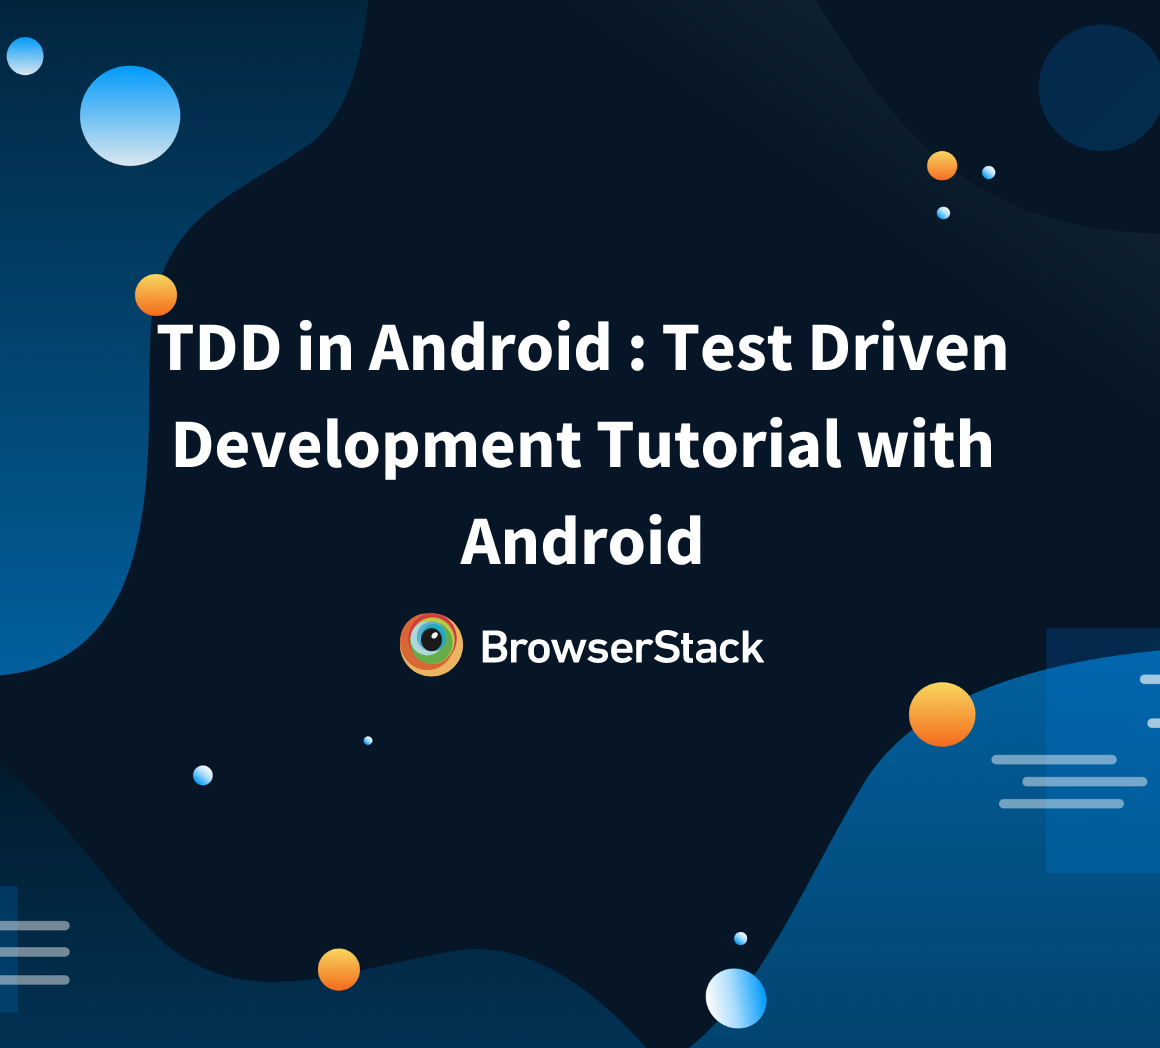 TDD in Android Test Driven Development Tutorial with Android